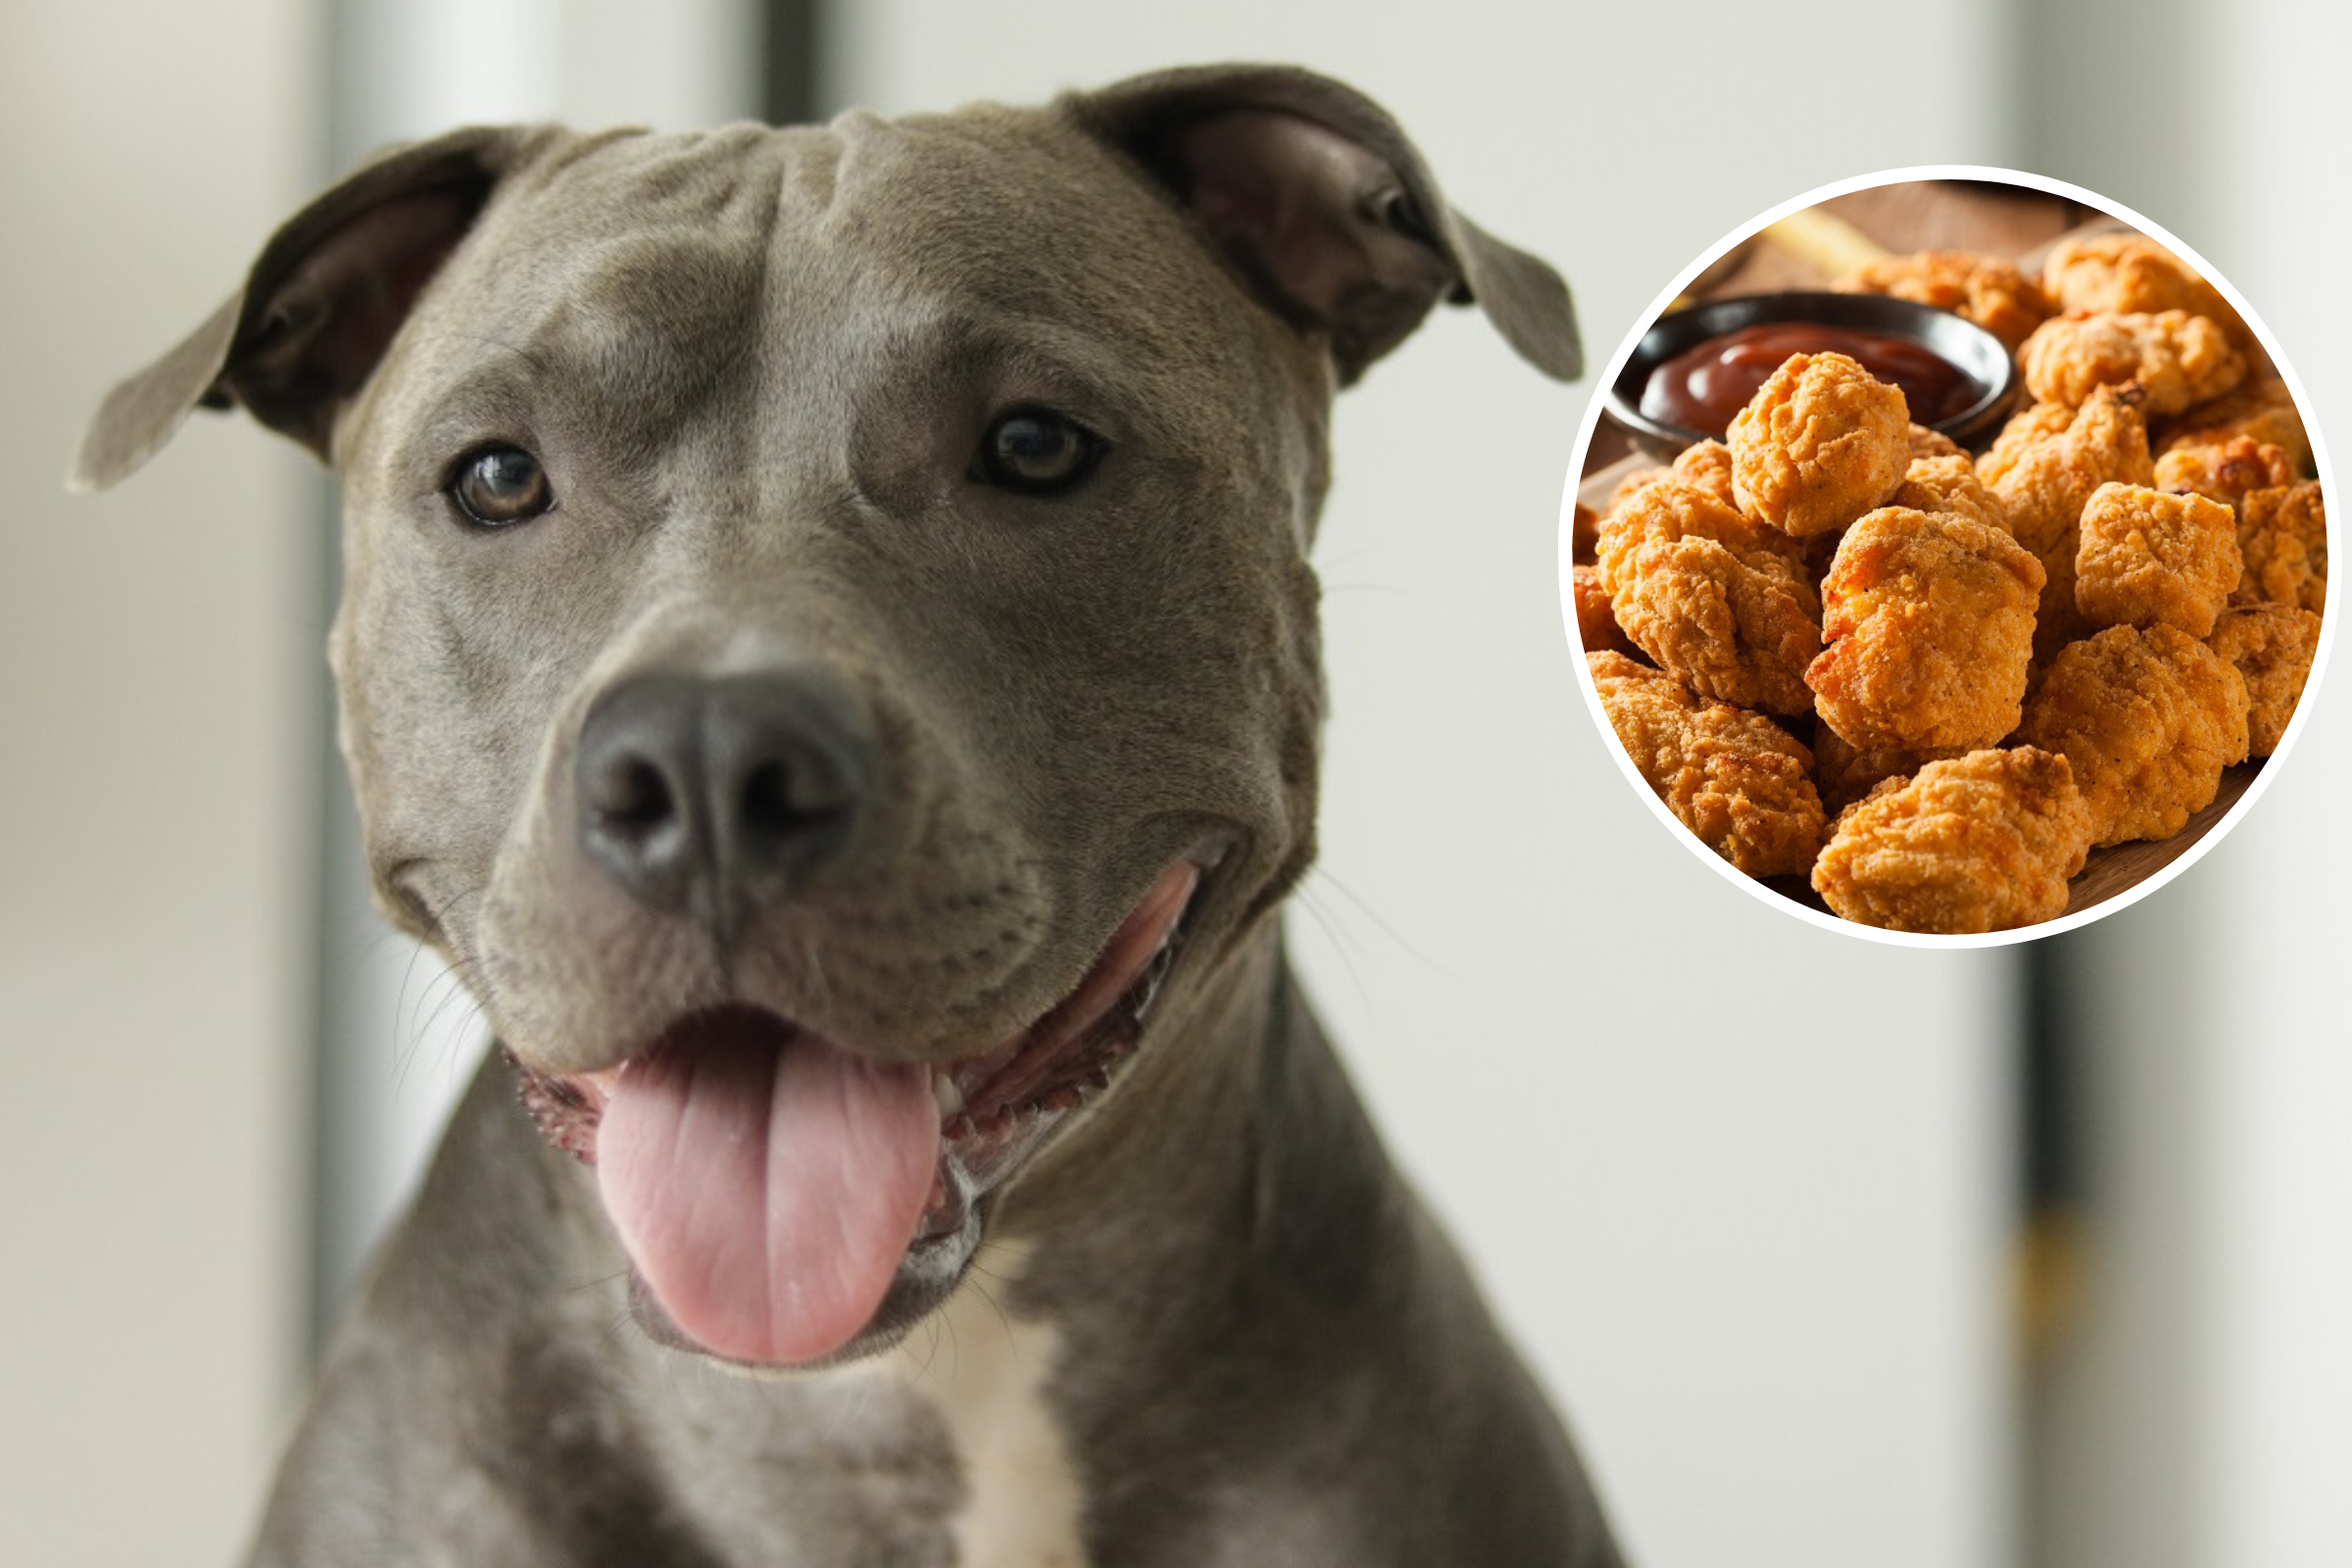 Pit Bull Can't Contain Excitement at McDonald's Meal—'Chicken Nugget Happy'